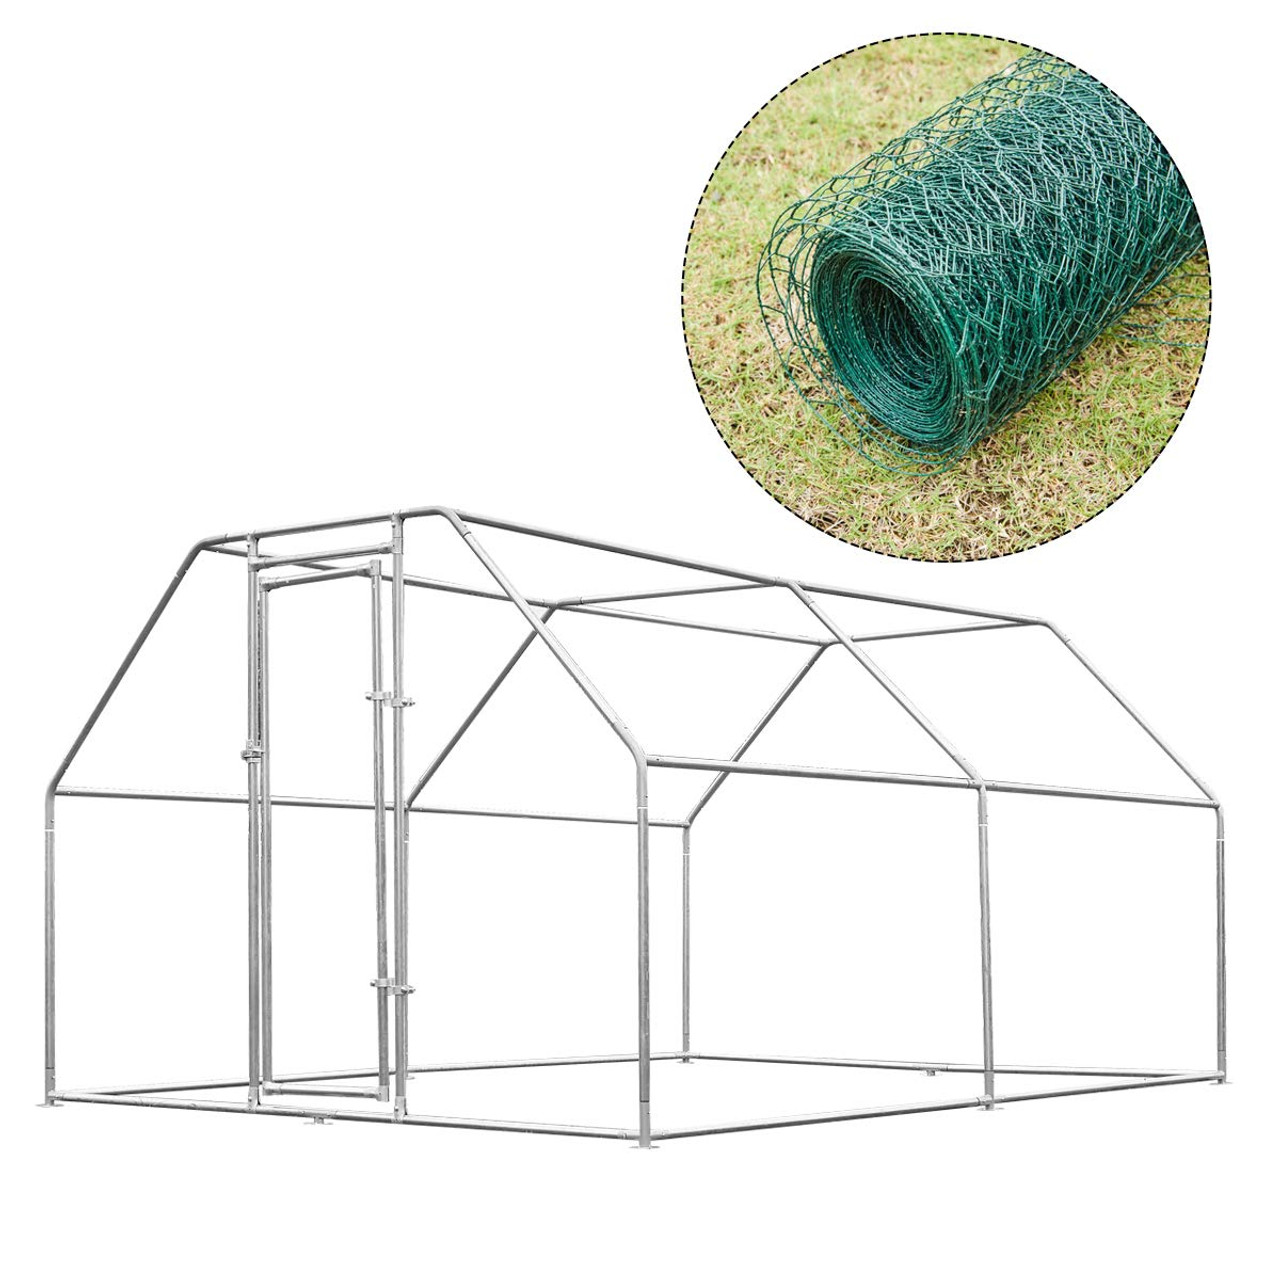 Large Walk-in Chicken Coop with Roof Cover product image